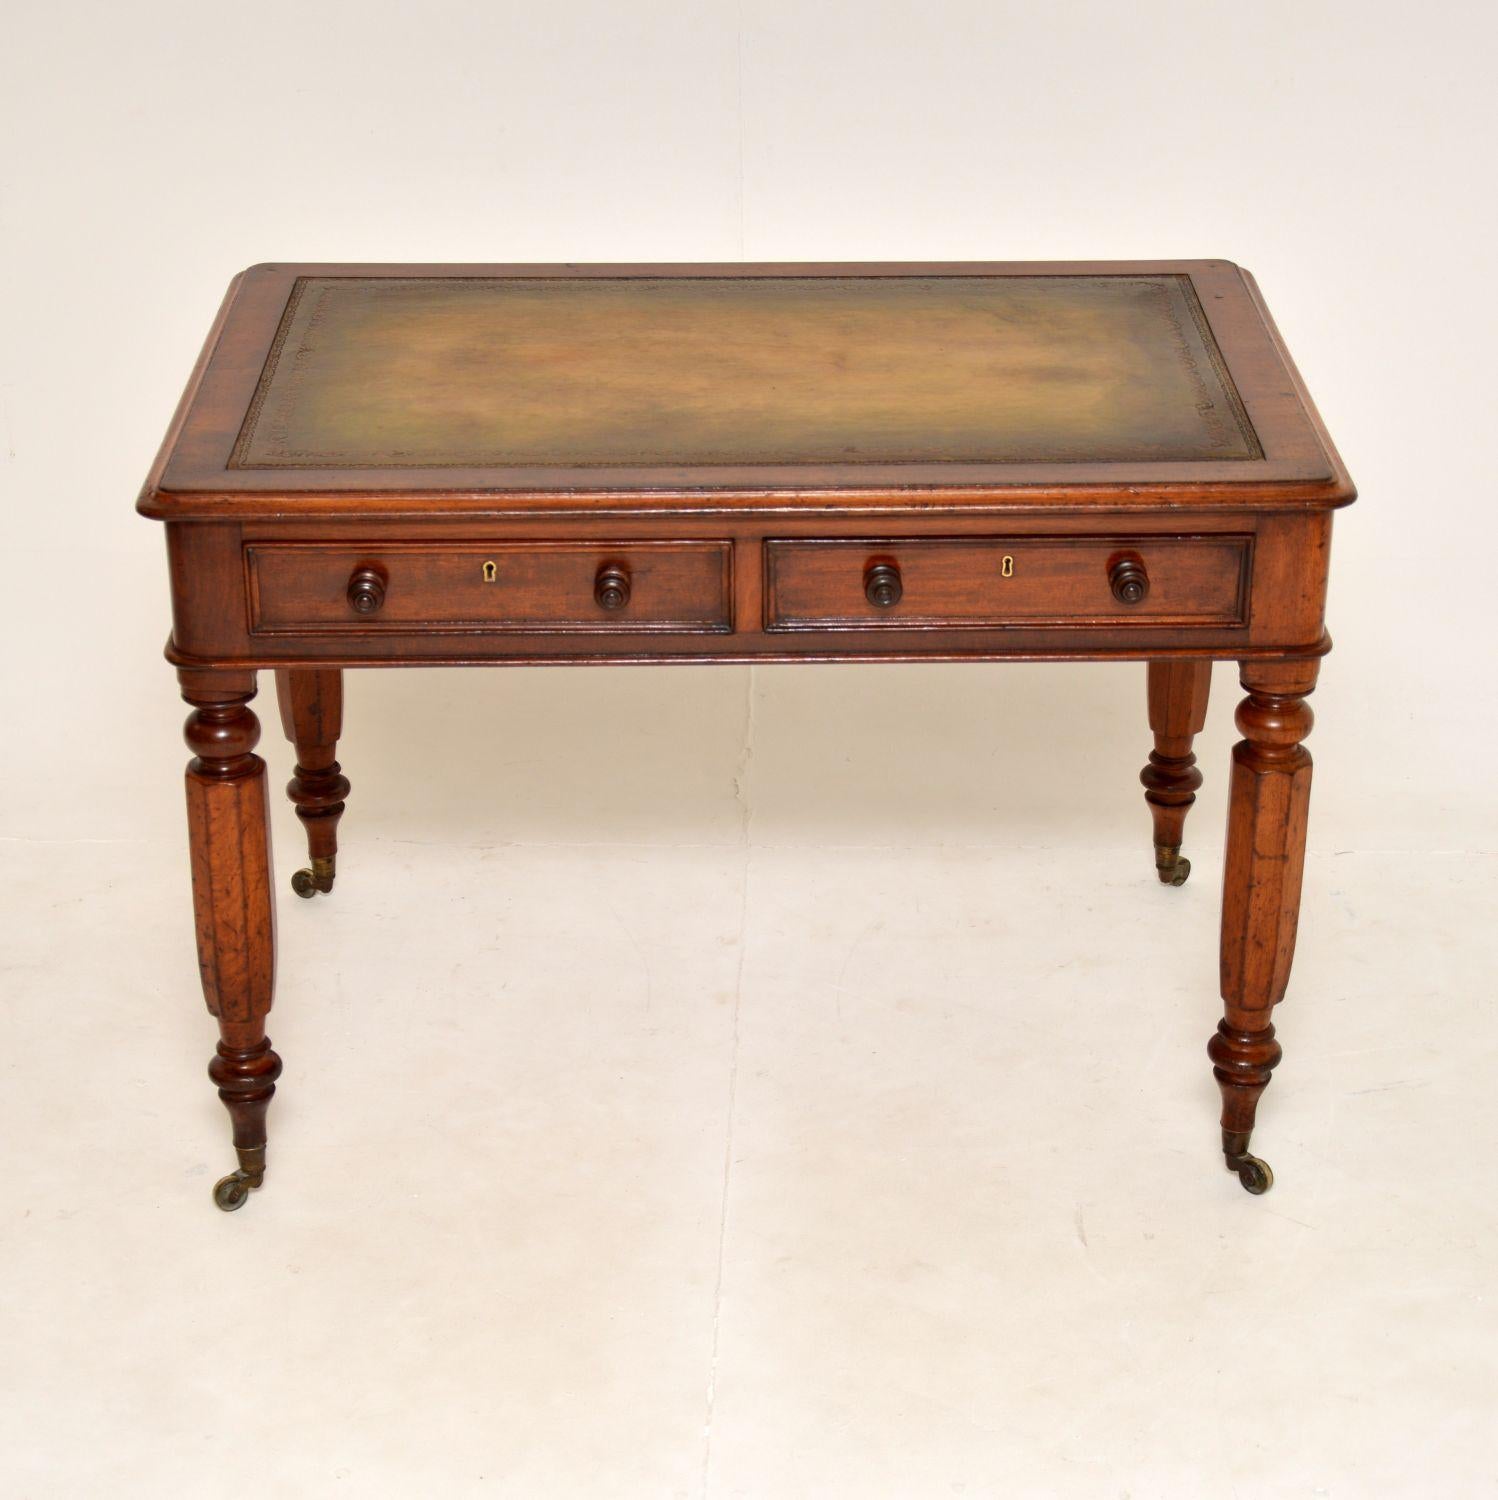 A fantastic original William IV period writing table / desk. This was made in England, it dates from around the 1830-1840’s.

The quality is superb and this is of useful proportions, with a generous work space. The inset leather top is hand coloured